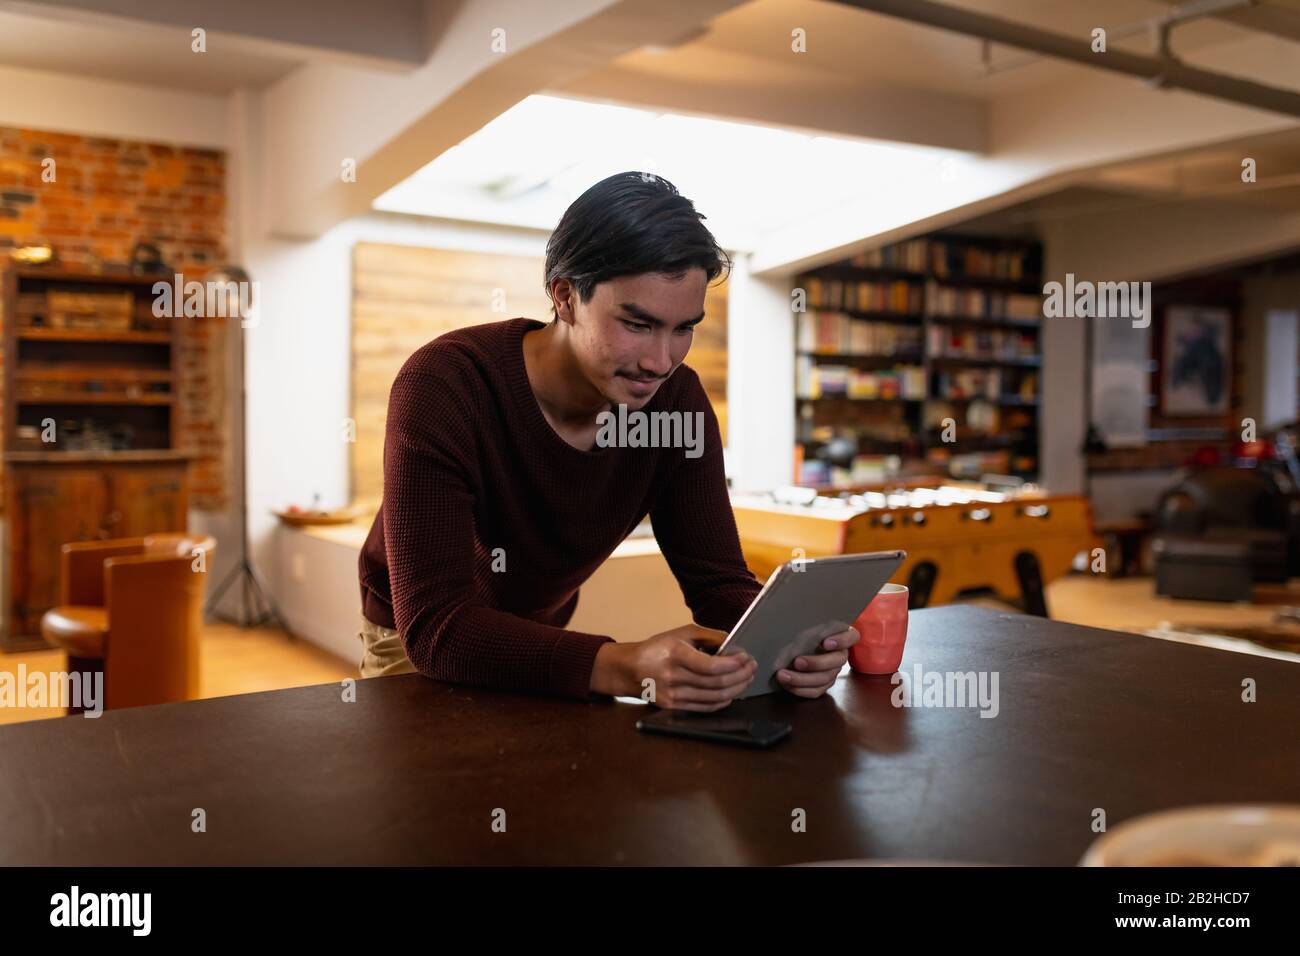 Young man using a touch pad at home Stock Photo